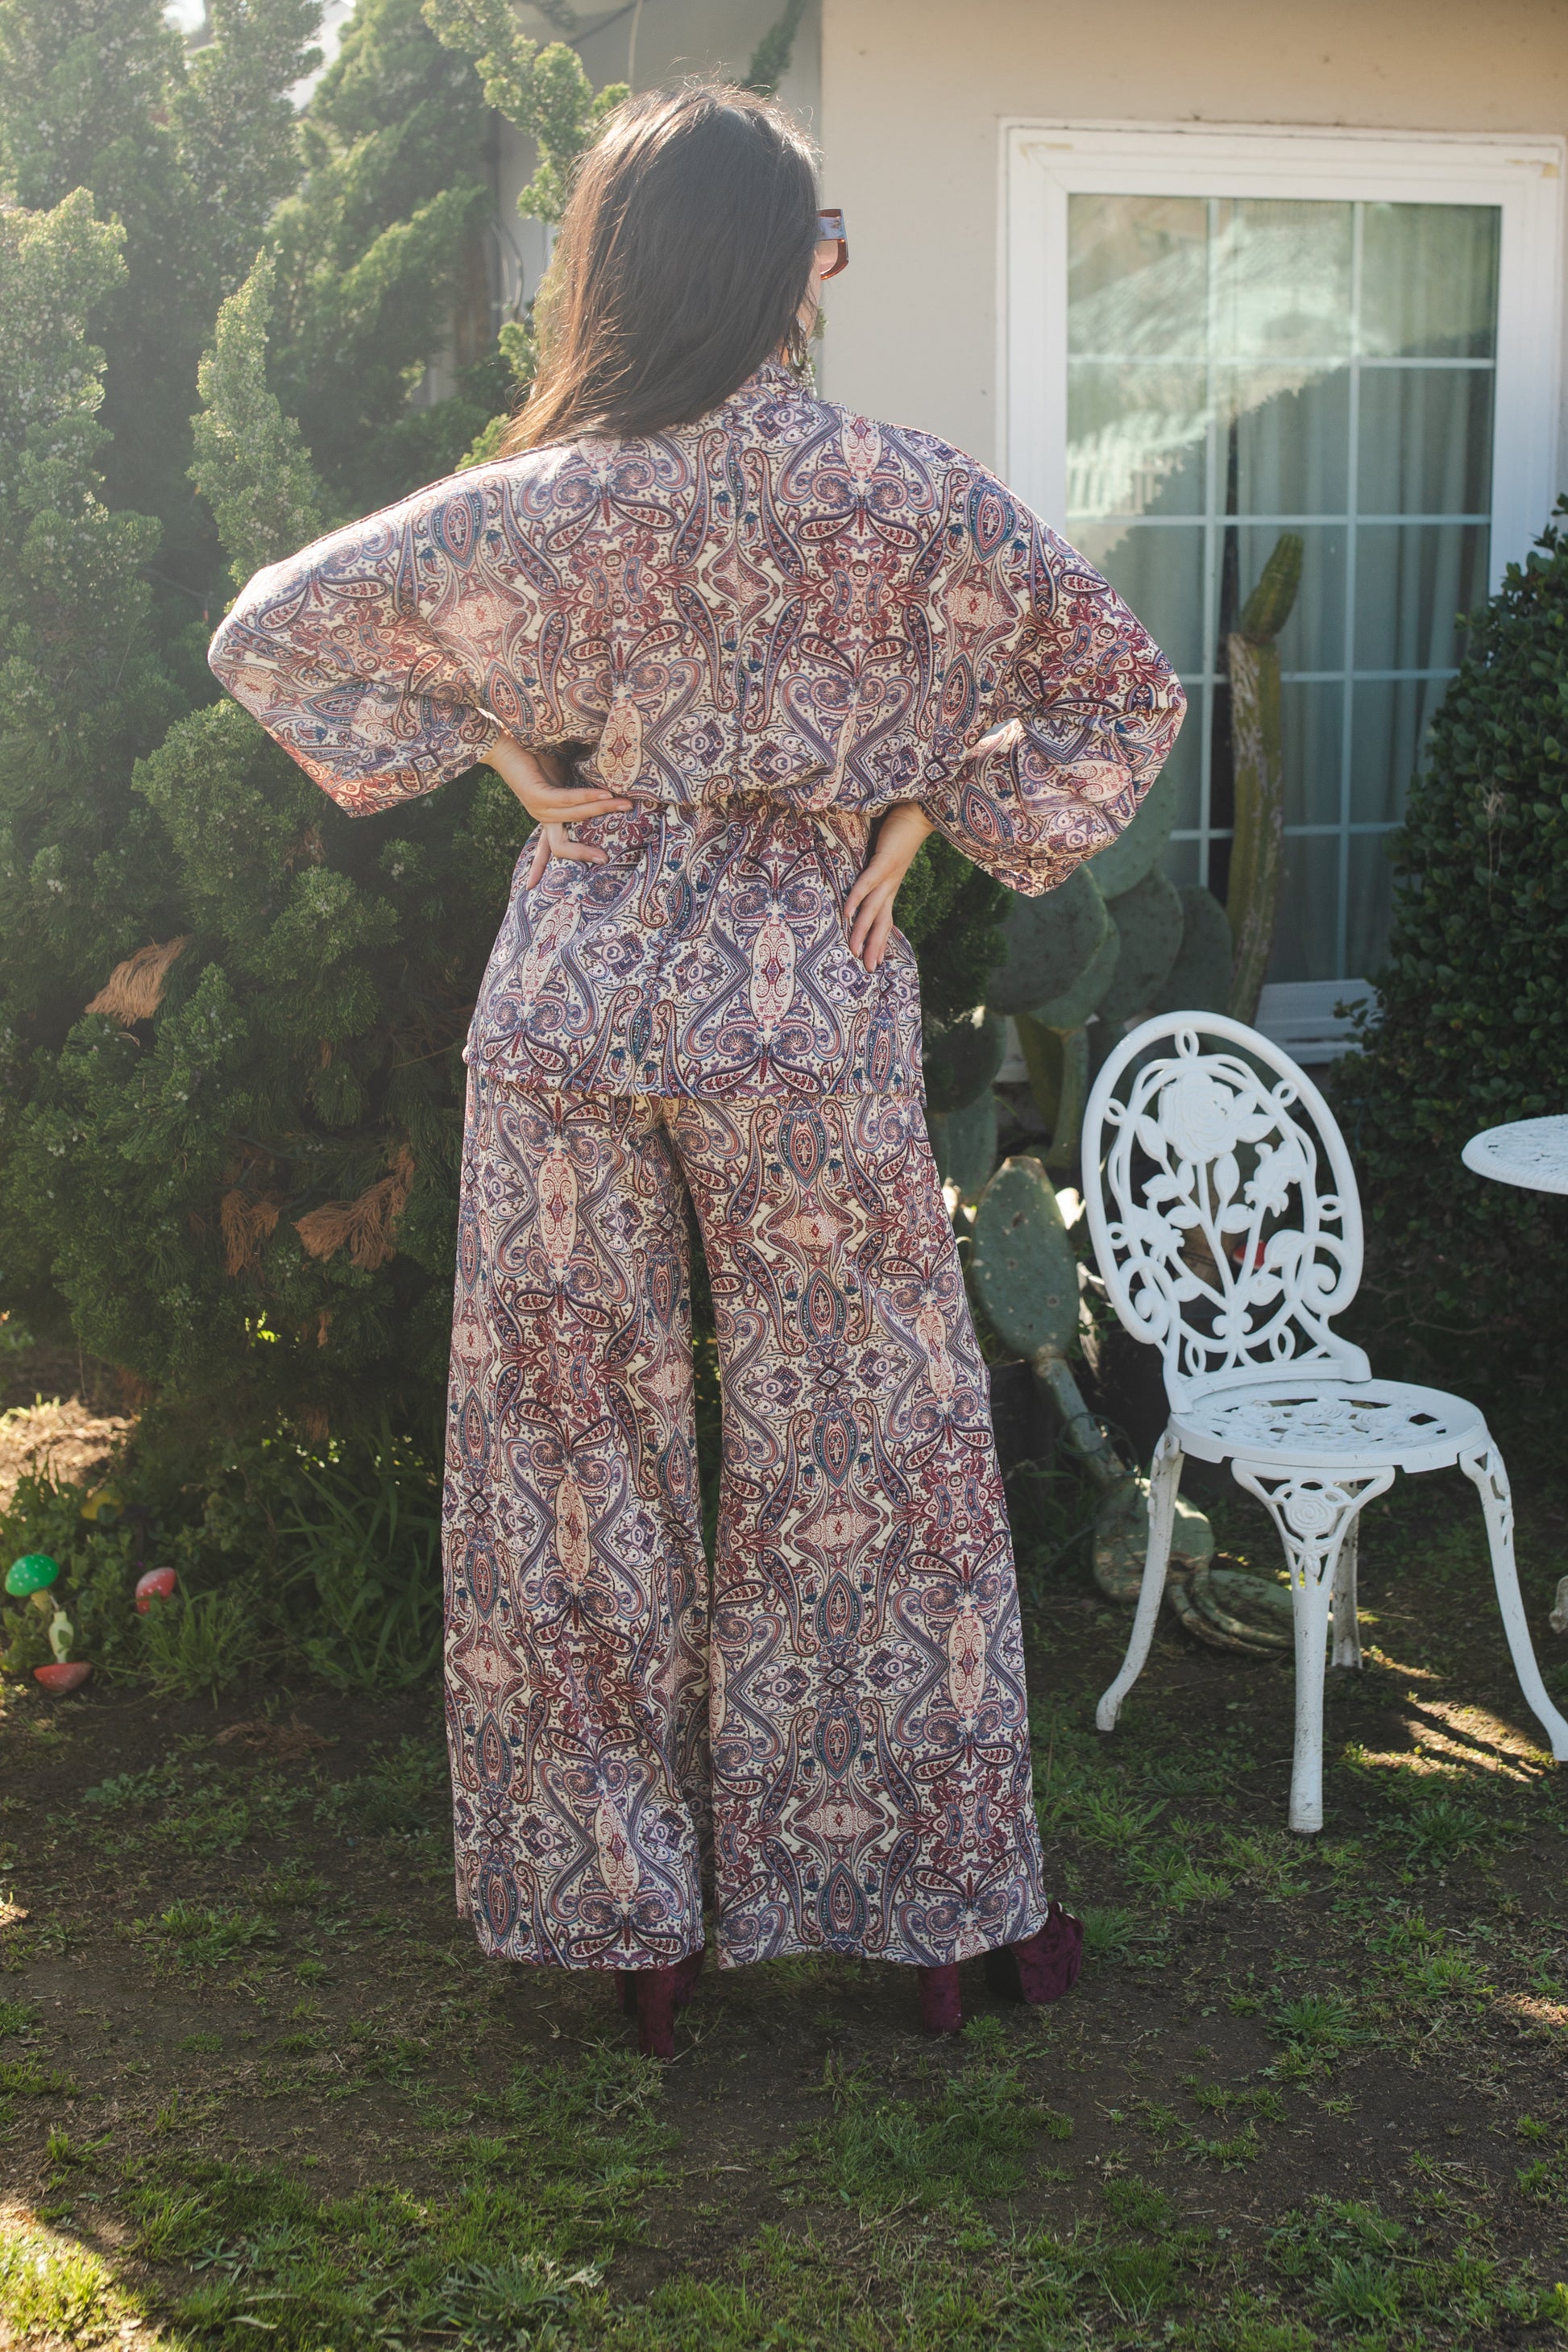 jennafer grace Olympia Paisley dolman palazzo set silky beige georgette with red blue paisley print matching co-ord coord set wrap blouse top with tasseled belt and palazzo pant with pockets and elastic waist boho bohemian hippie romantic whimsical glamorous pajamas pjs glam lounge wear handmade in california usa